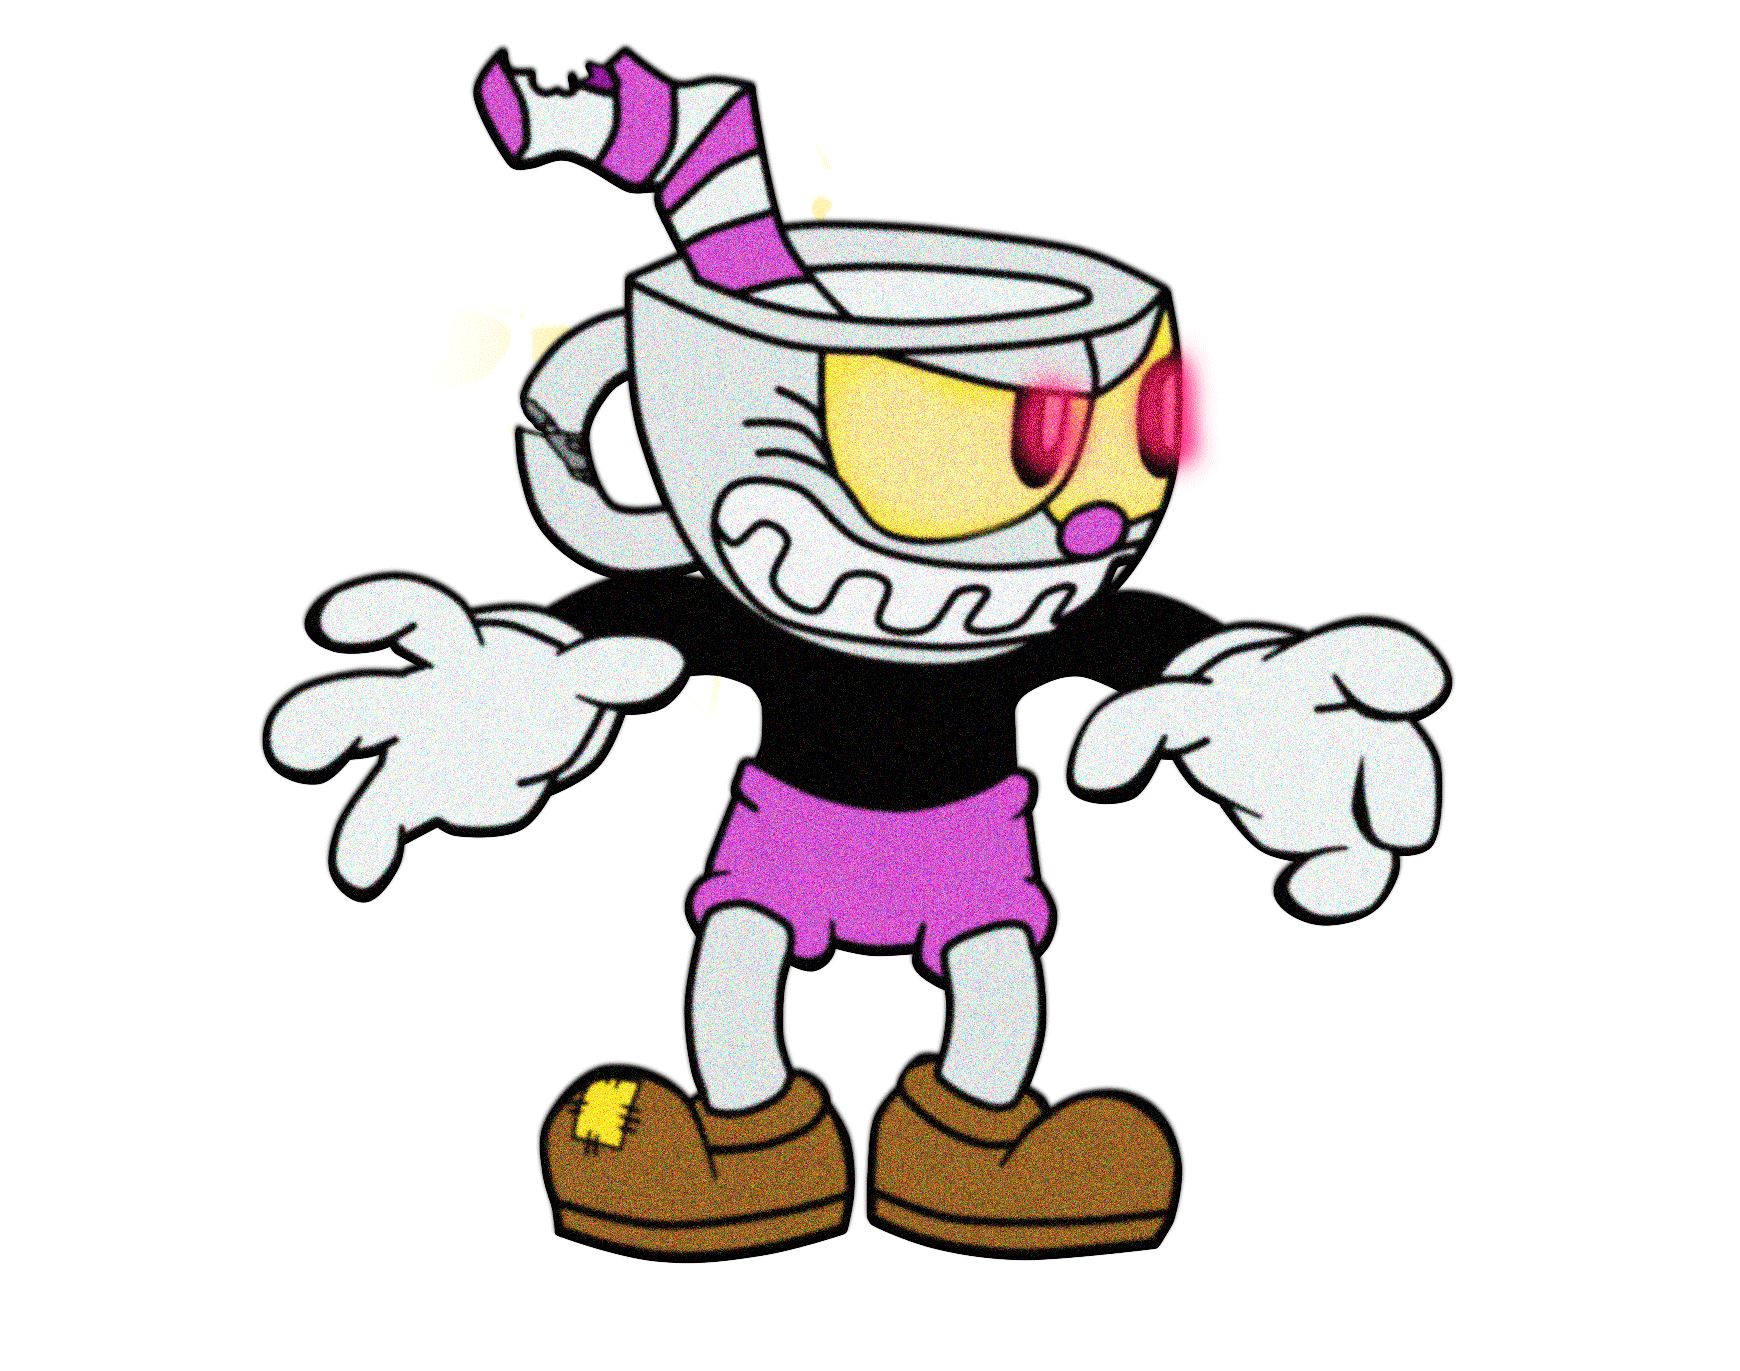 Evil Cuphead Giff By CodyCobain On DeviantArt.